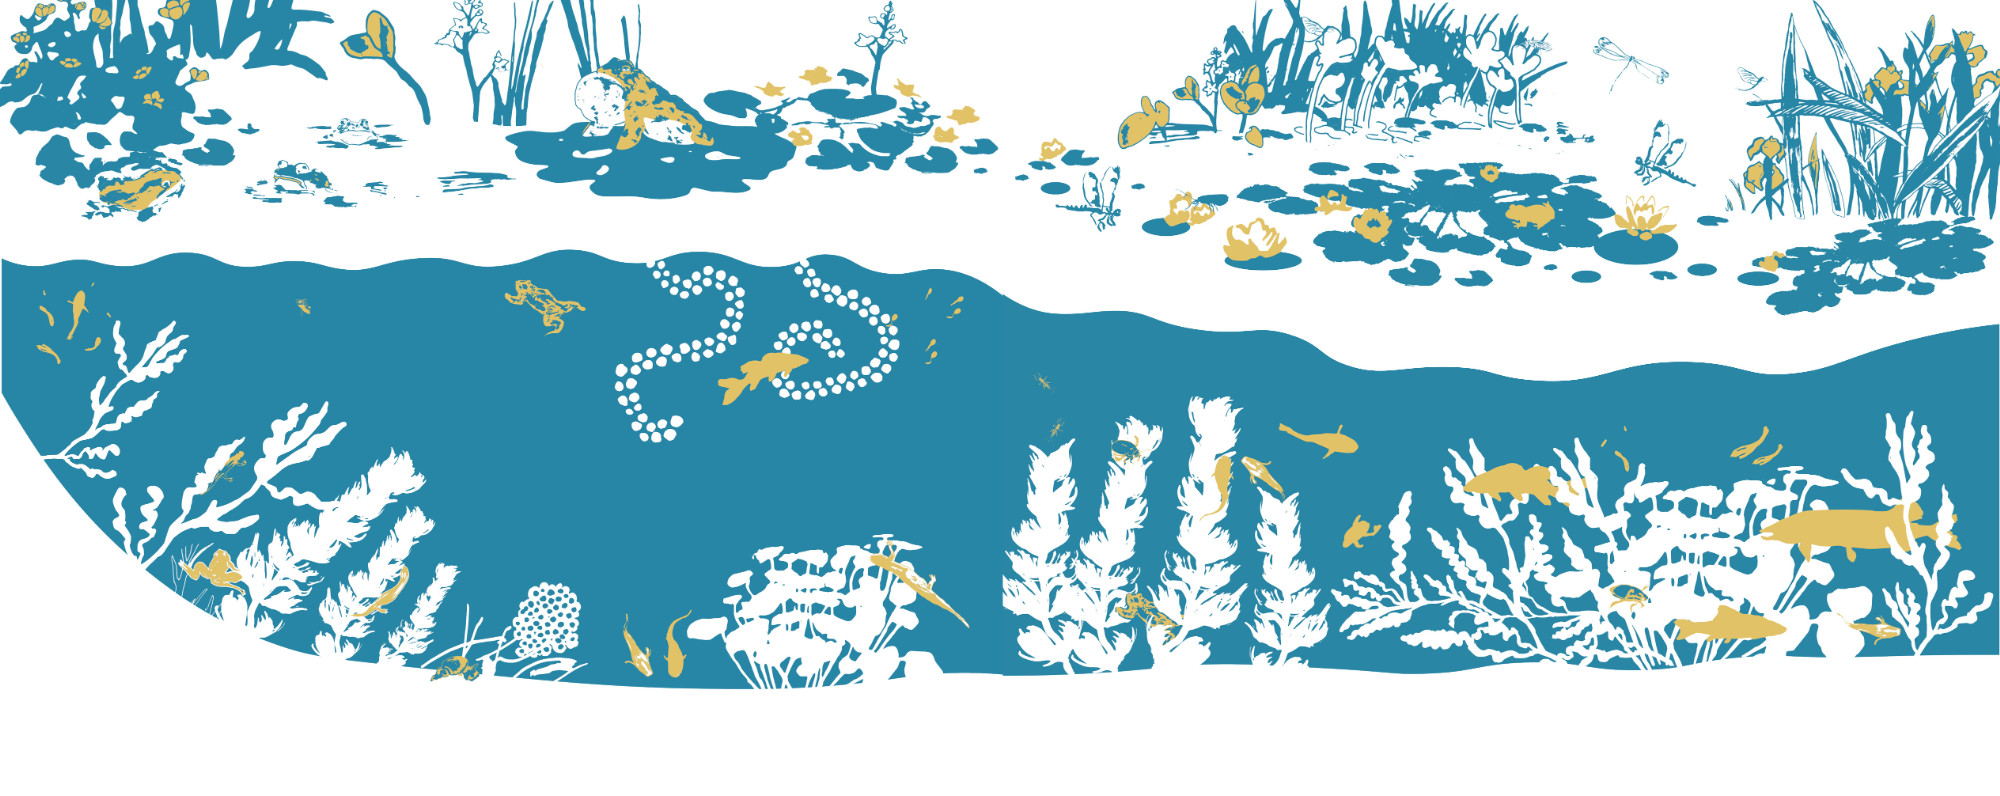 This image is based on a text about the ecosystem of a pond. The illustration above is showing spring on the left moving into summer on the right. The full image including all seasons can be found at elineveening.com.